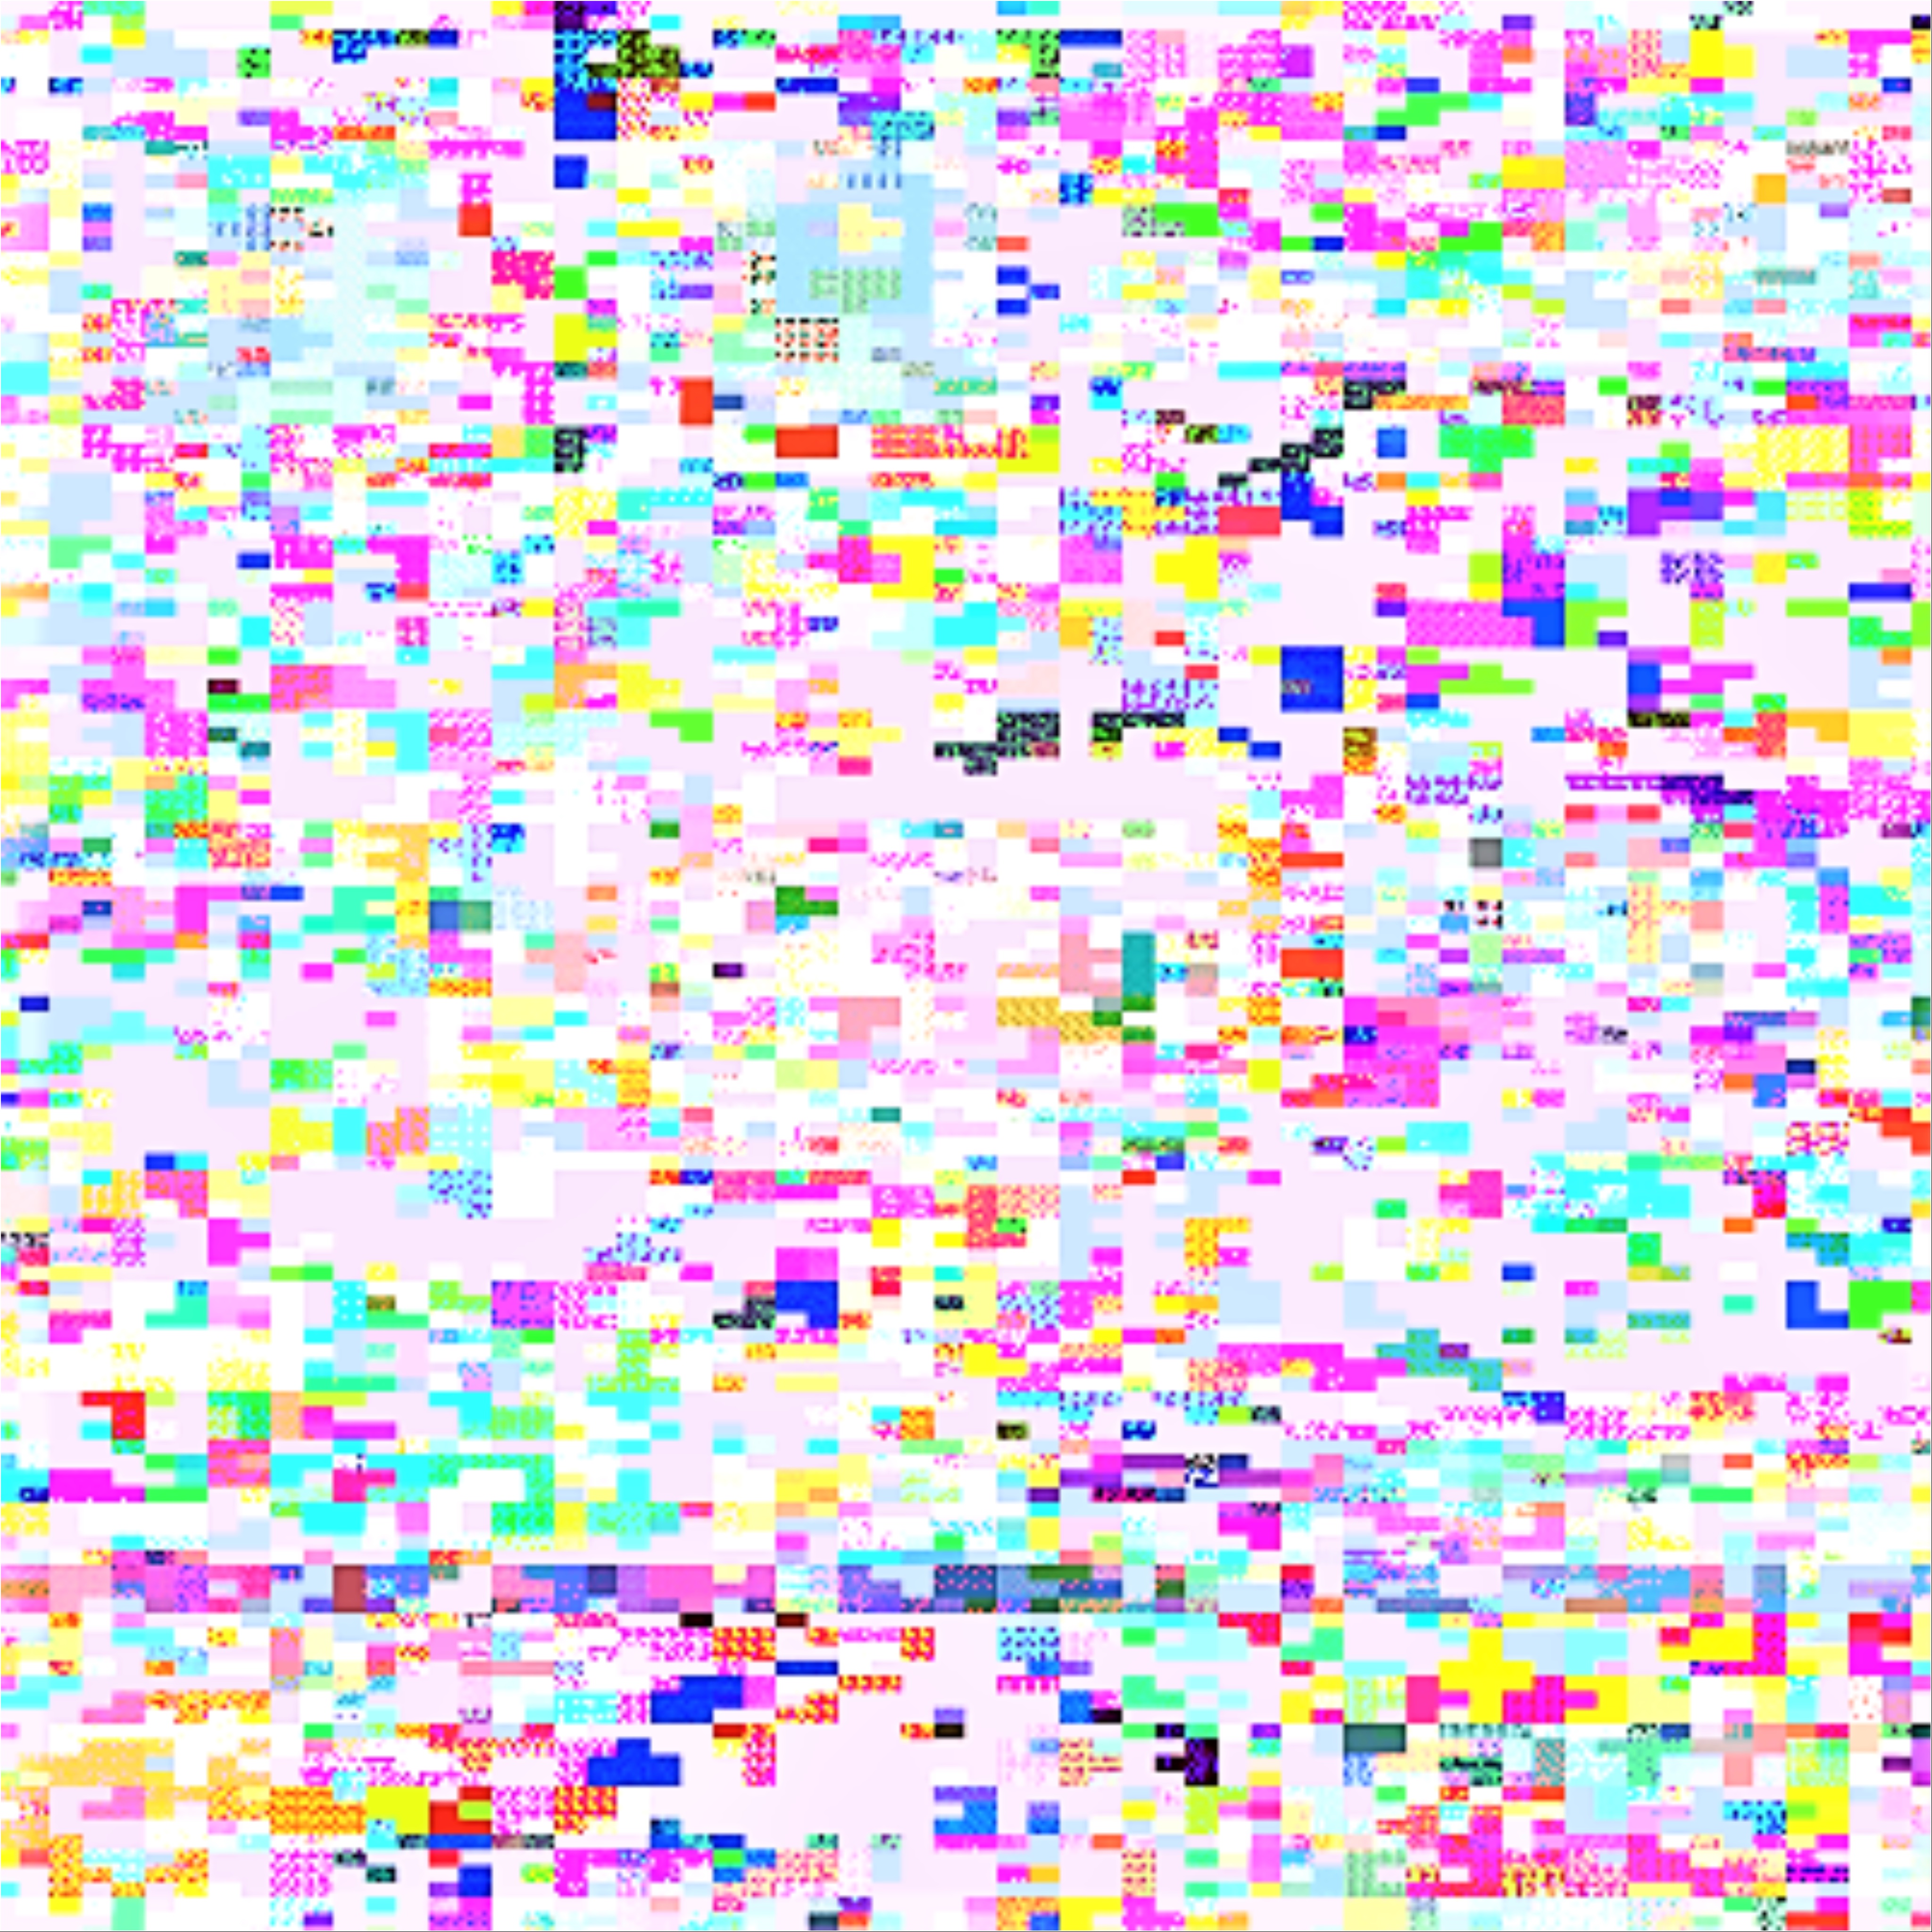 Operational Glitch Abstraction III